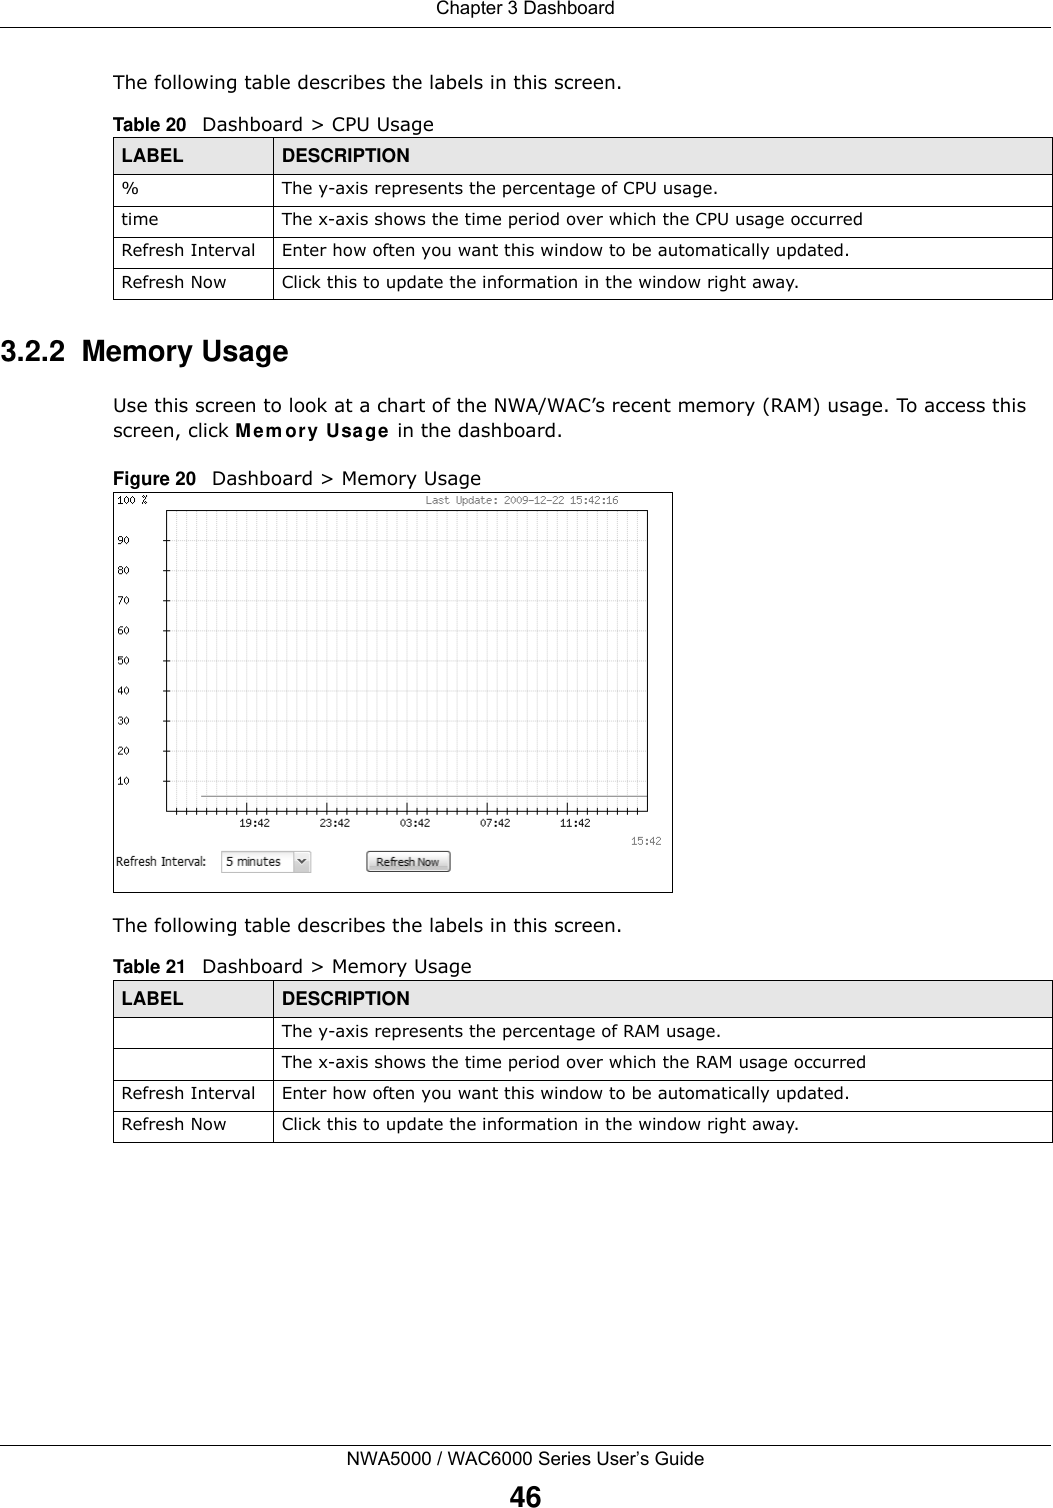 Chapter 3 DashboardNWA5000 / WAC6000 Series User’s Guide46The following table describes the labels in this screen.  3.2.2  Memory UsageUse this screen to look at a chart of the NWA/WAC’s recent memory (RAM) usage. To access this screen, click Me m ory Usa ge in the dashboard.Figure 20   Dashboard &gt; Memory UsageThe following table describes the labels in this screen.  Table 20   Dashboard &gt; CPU UsageLABEL DESCRIPTION% The y-axis represents the percentage of CPU usage.time The x-axis shows the time period over which the CPU usage occurredRefresh Interval Enter how often you want this window to be automatically updated.Refresh Now Click this to update the information in the window right away. Table 21   Dashboard &gt; Memory UsageLABEL DESCRIPTIONThe y-axis represents the percentage of RAM usage.The x-axis shows the time period over which the RAM usage occurredRefresh Interval Enter how often you want this window to be automatically updated.Refresh Now Click this to update the information in the window right away. 